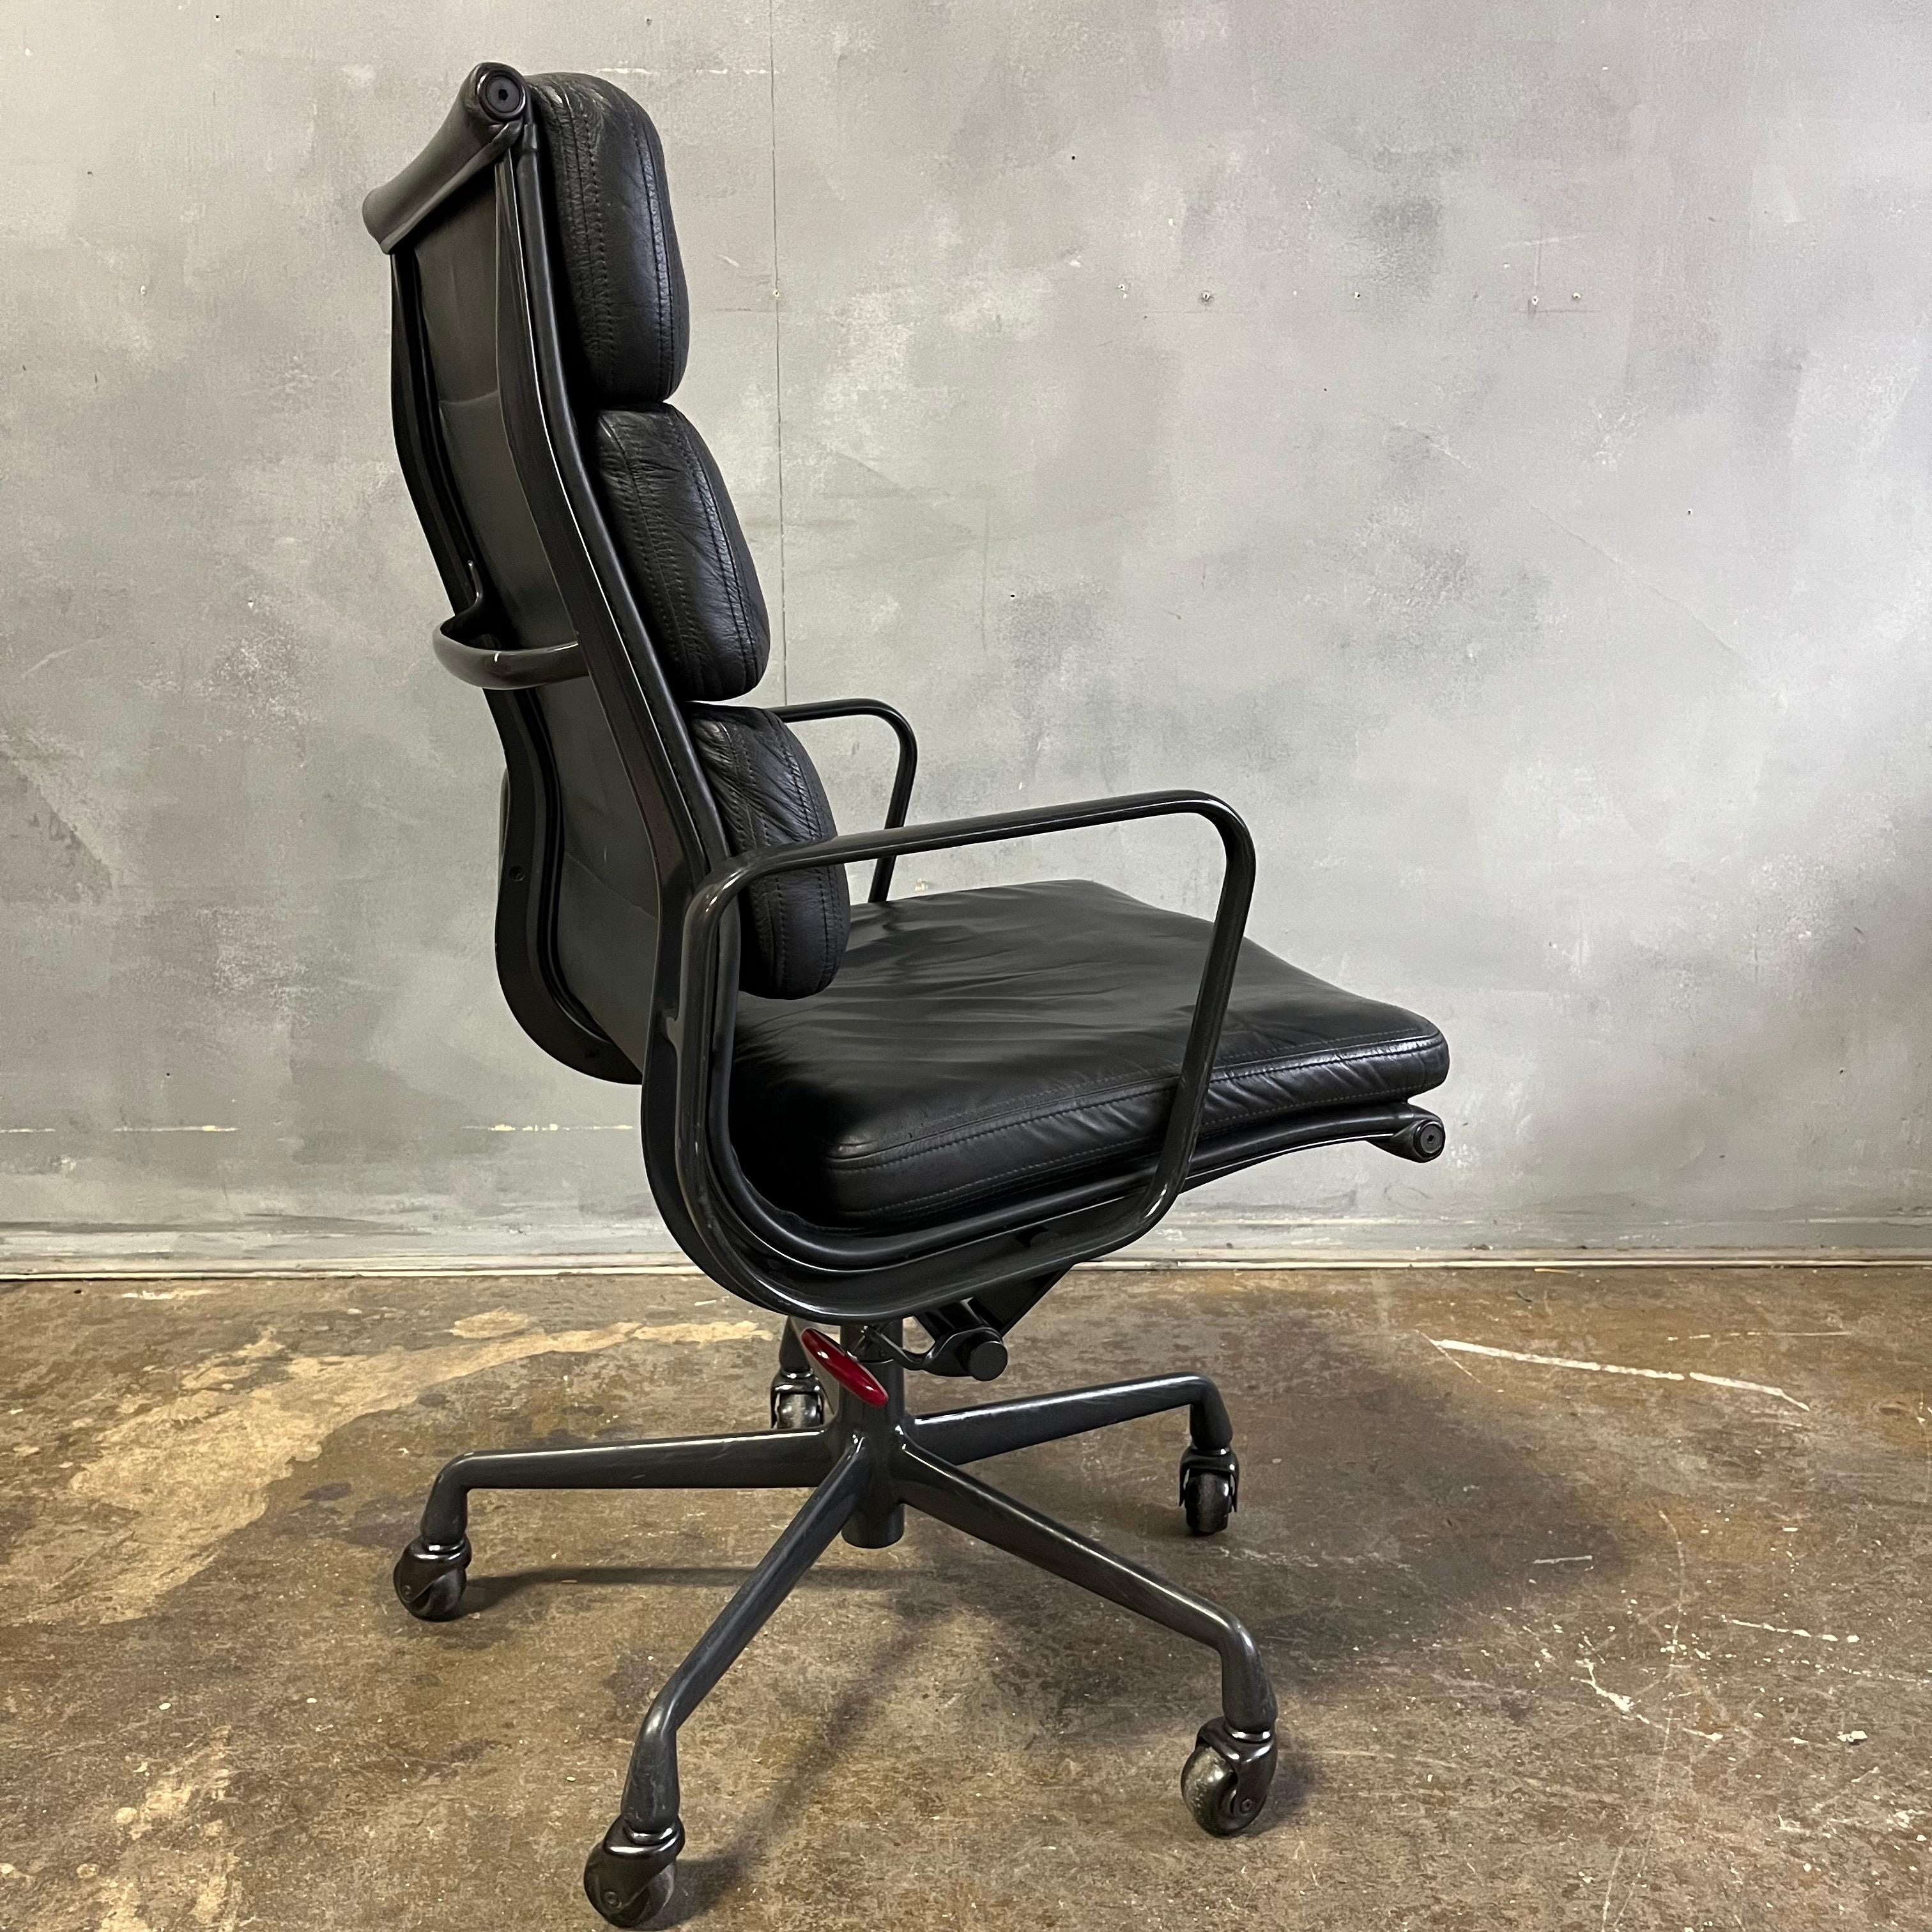 For your consideration is an Eames for Herman Miller vintage soft pad chair ( High Back) in a dark grey / black frame and leather upholstery. This chair is from the 1980's when some experimentation with color frames and leather took place. Note the